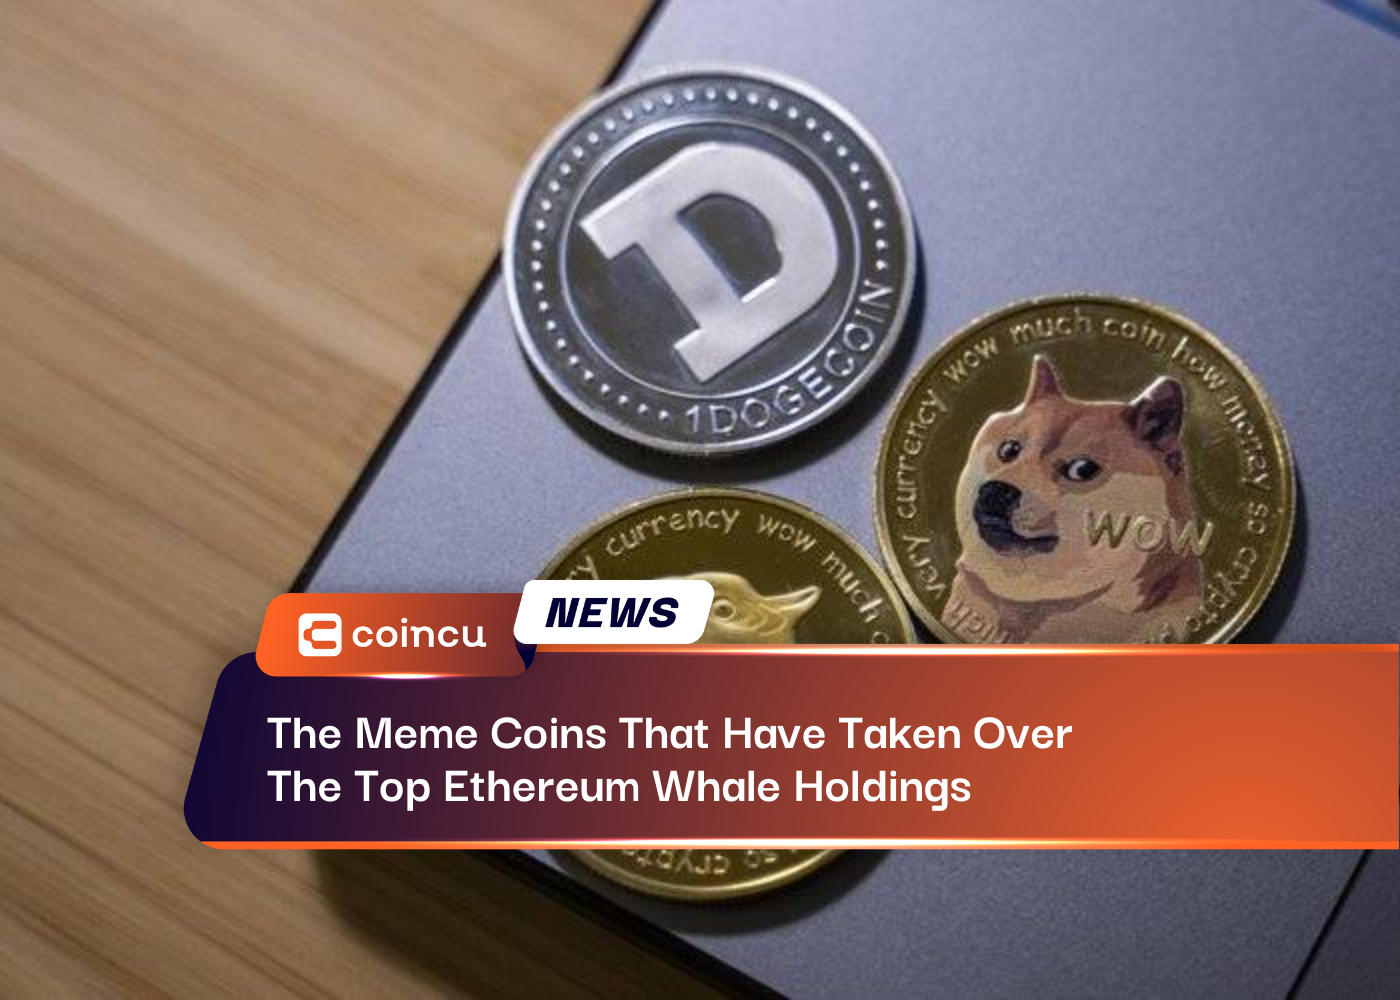 The Meme Coins That Have Taken Over The Top Ethereum Whale Holdings